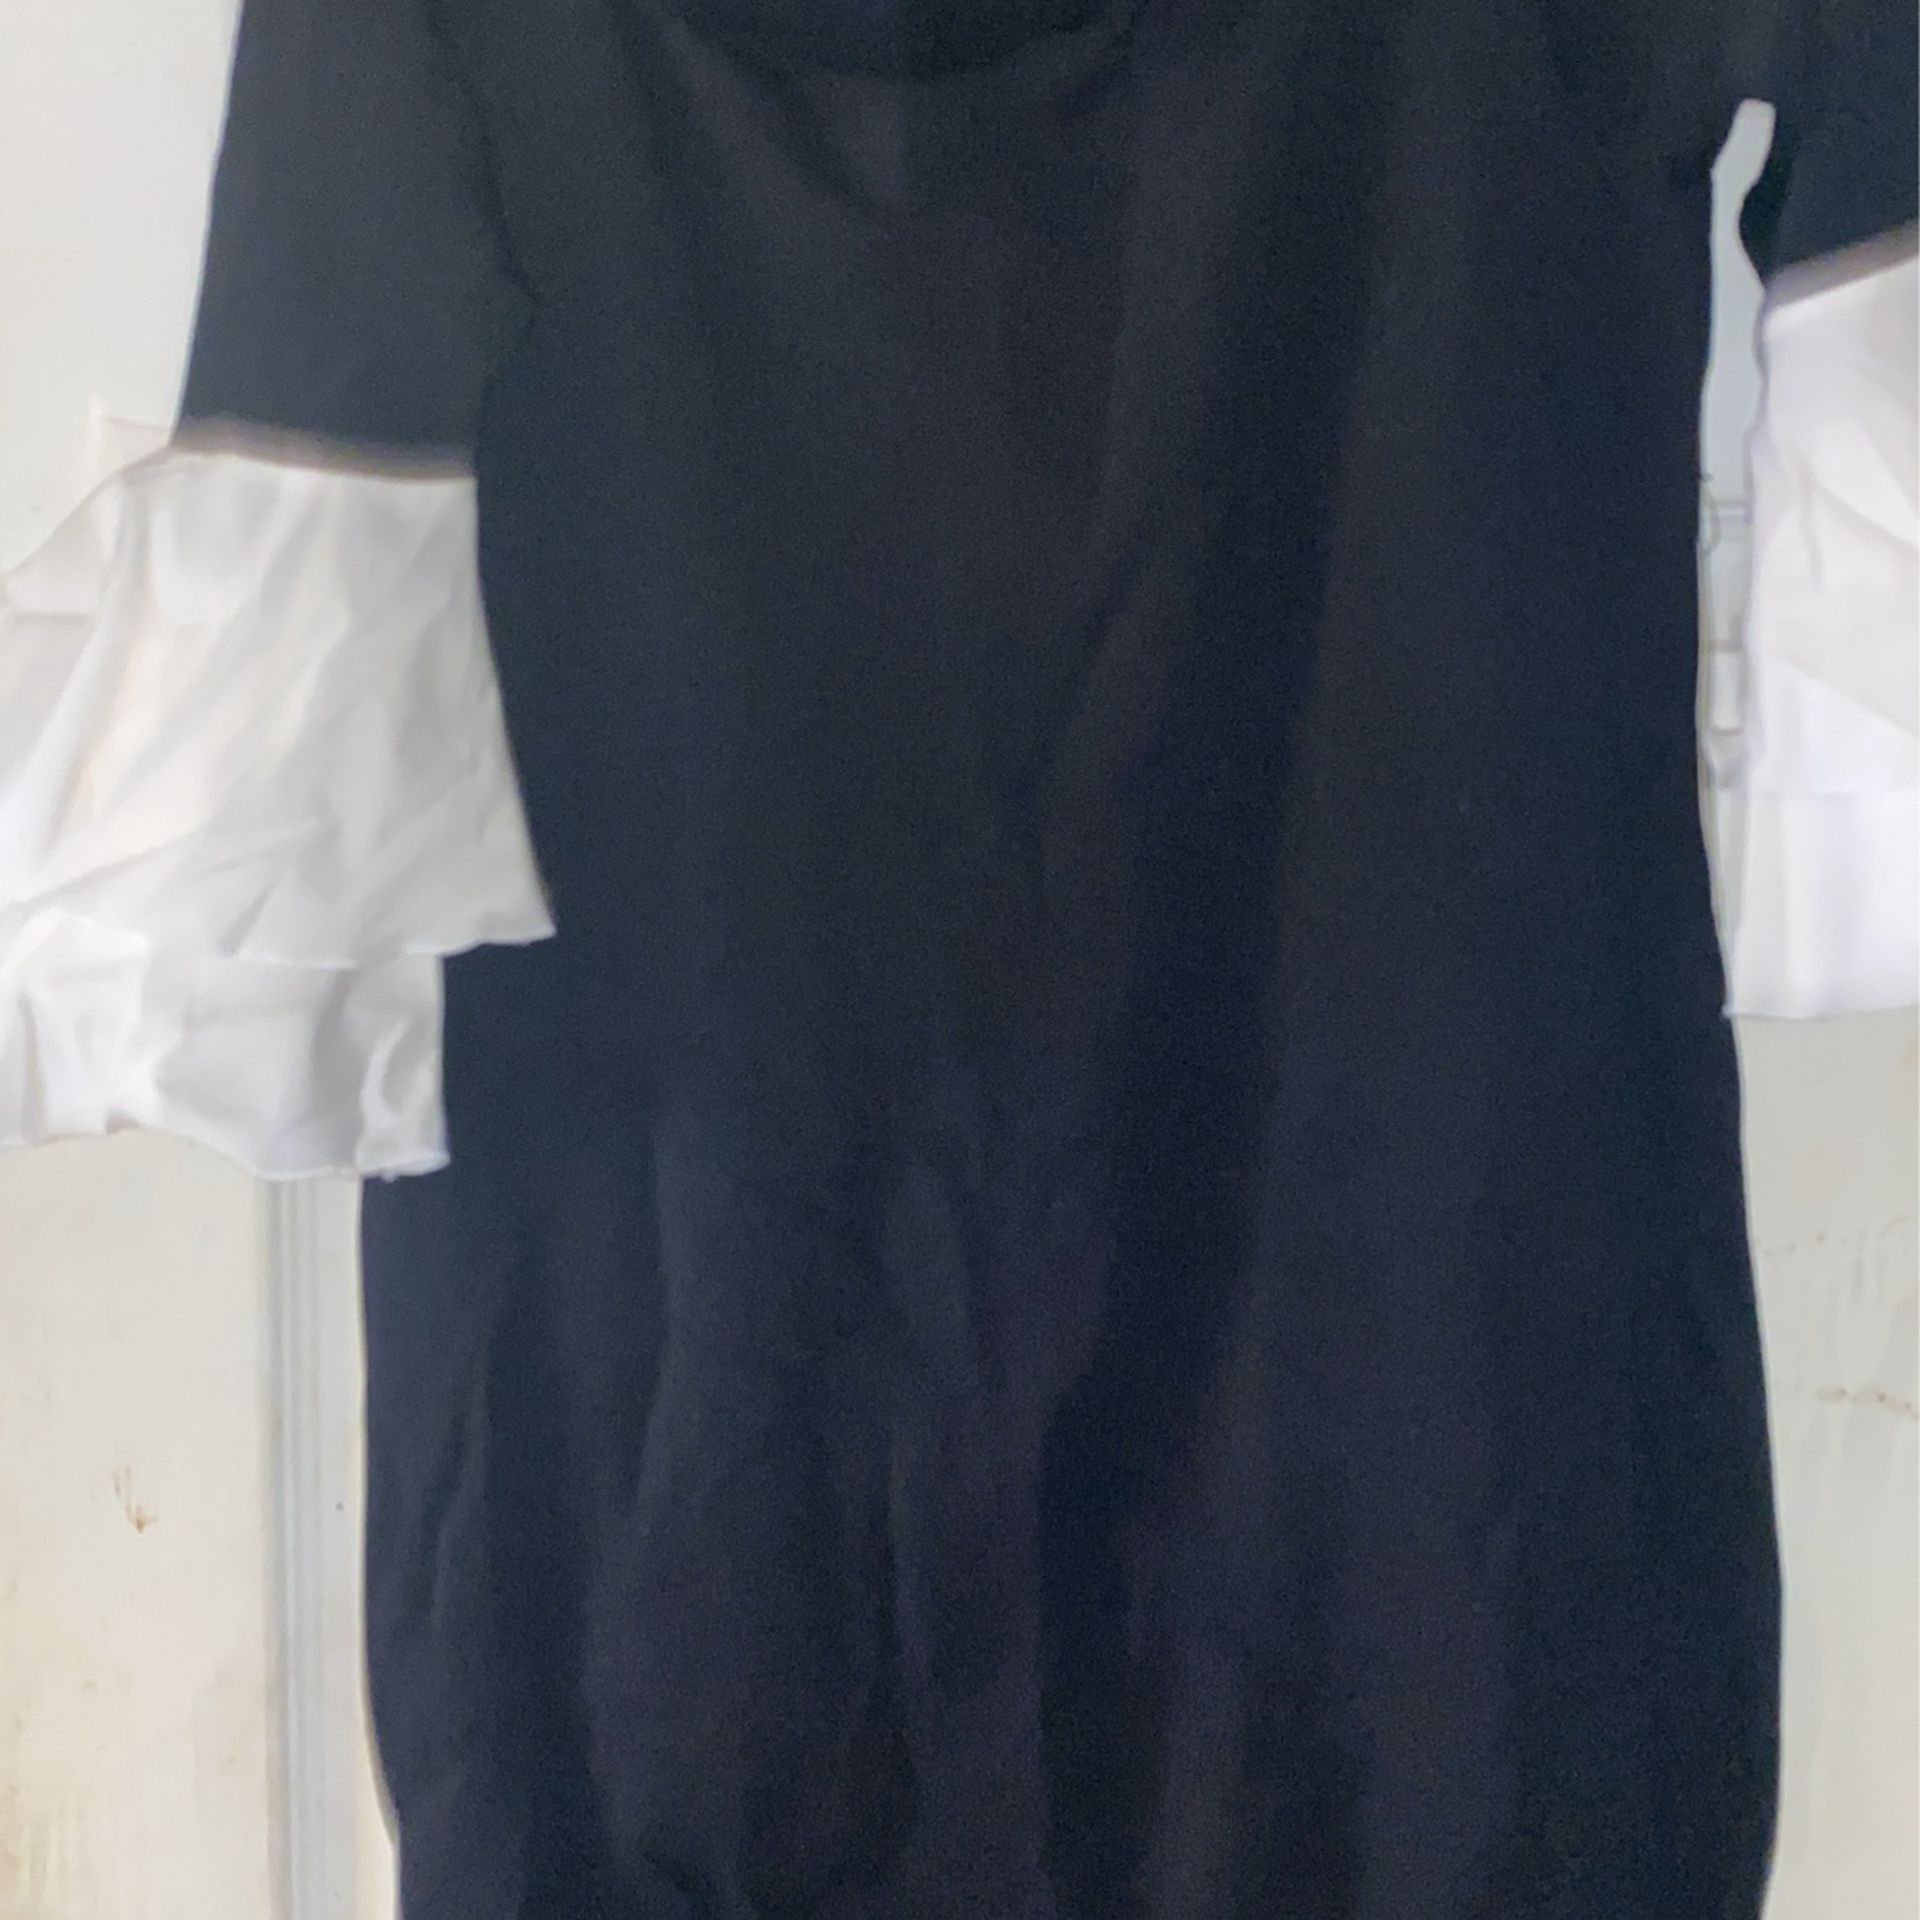 Brand New New York And Company Black Dress It’s Free Yes Free 